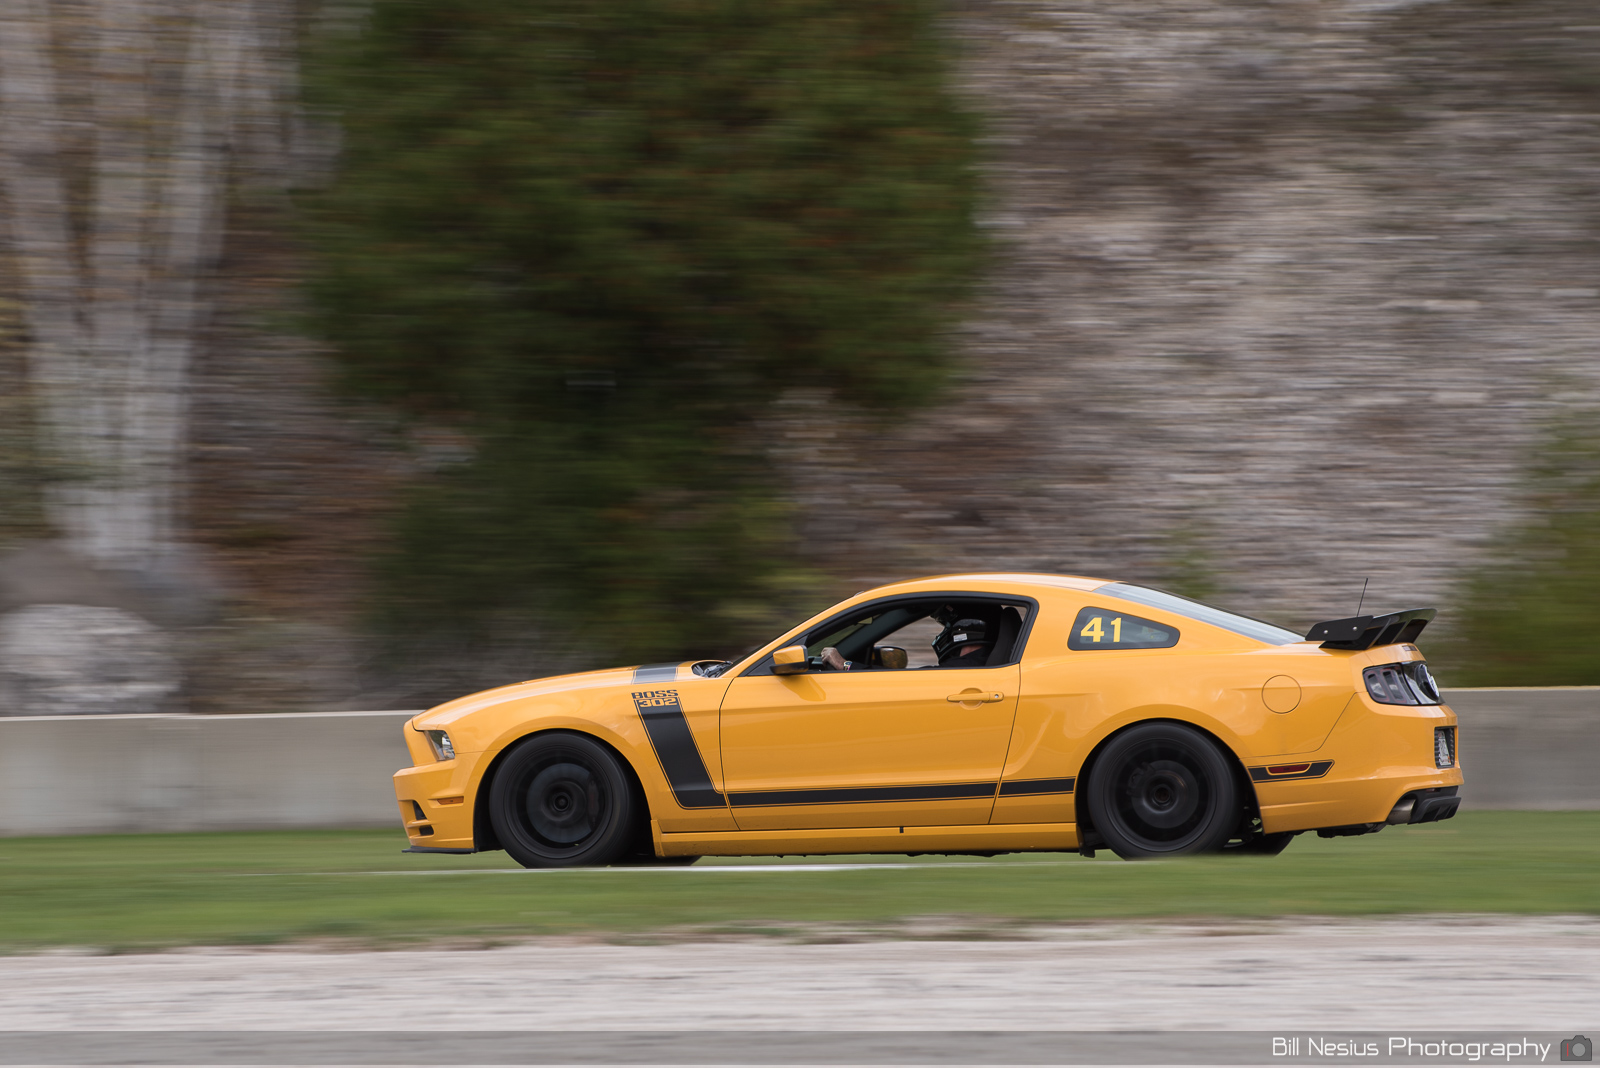 Ford Mustang Boss 302 Number 41 ~ DSC_5314 ~ 4